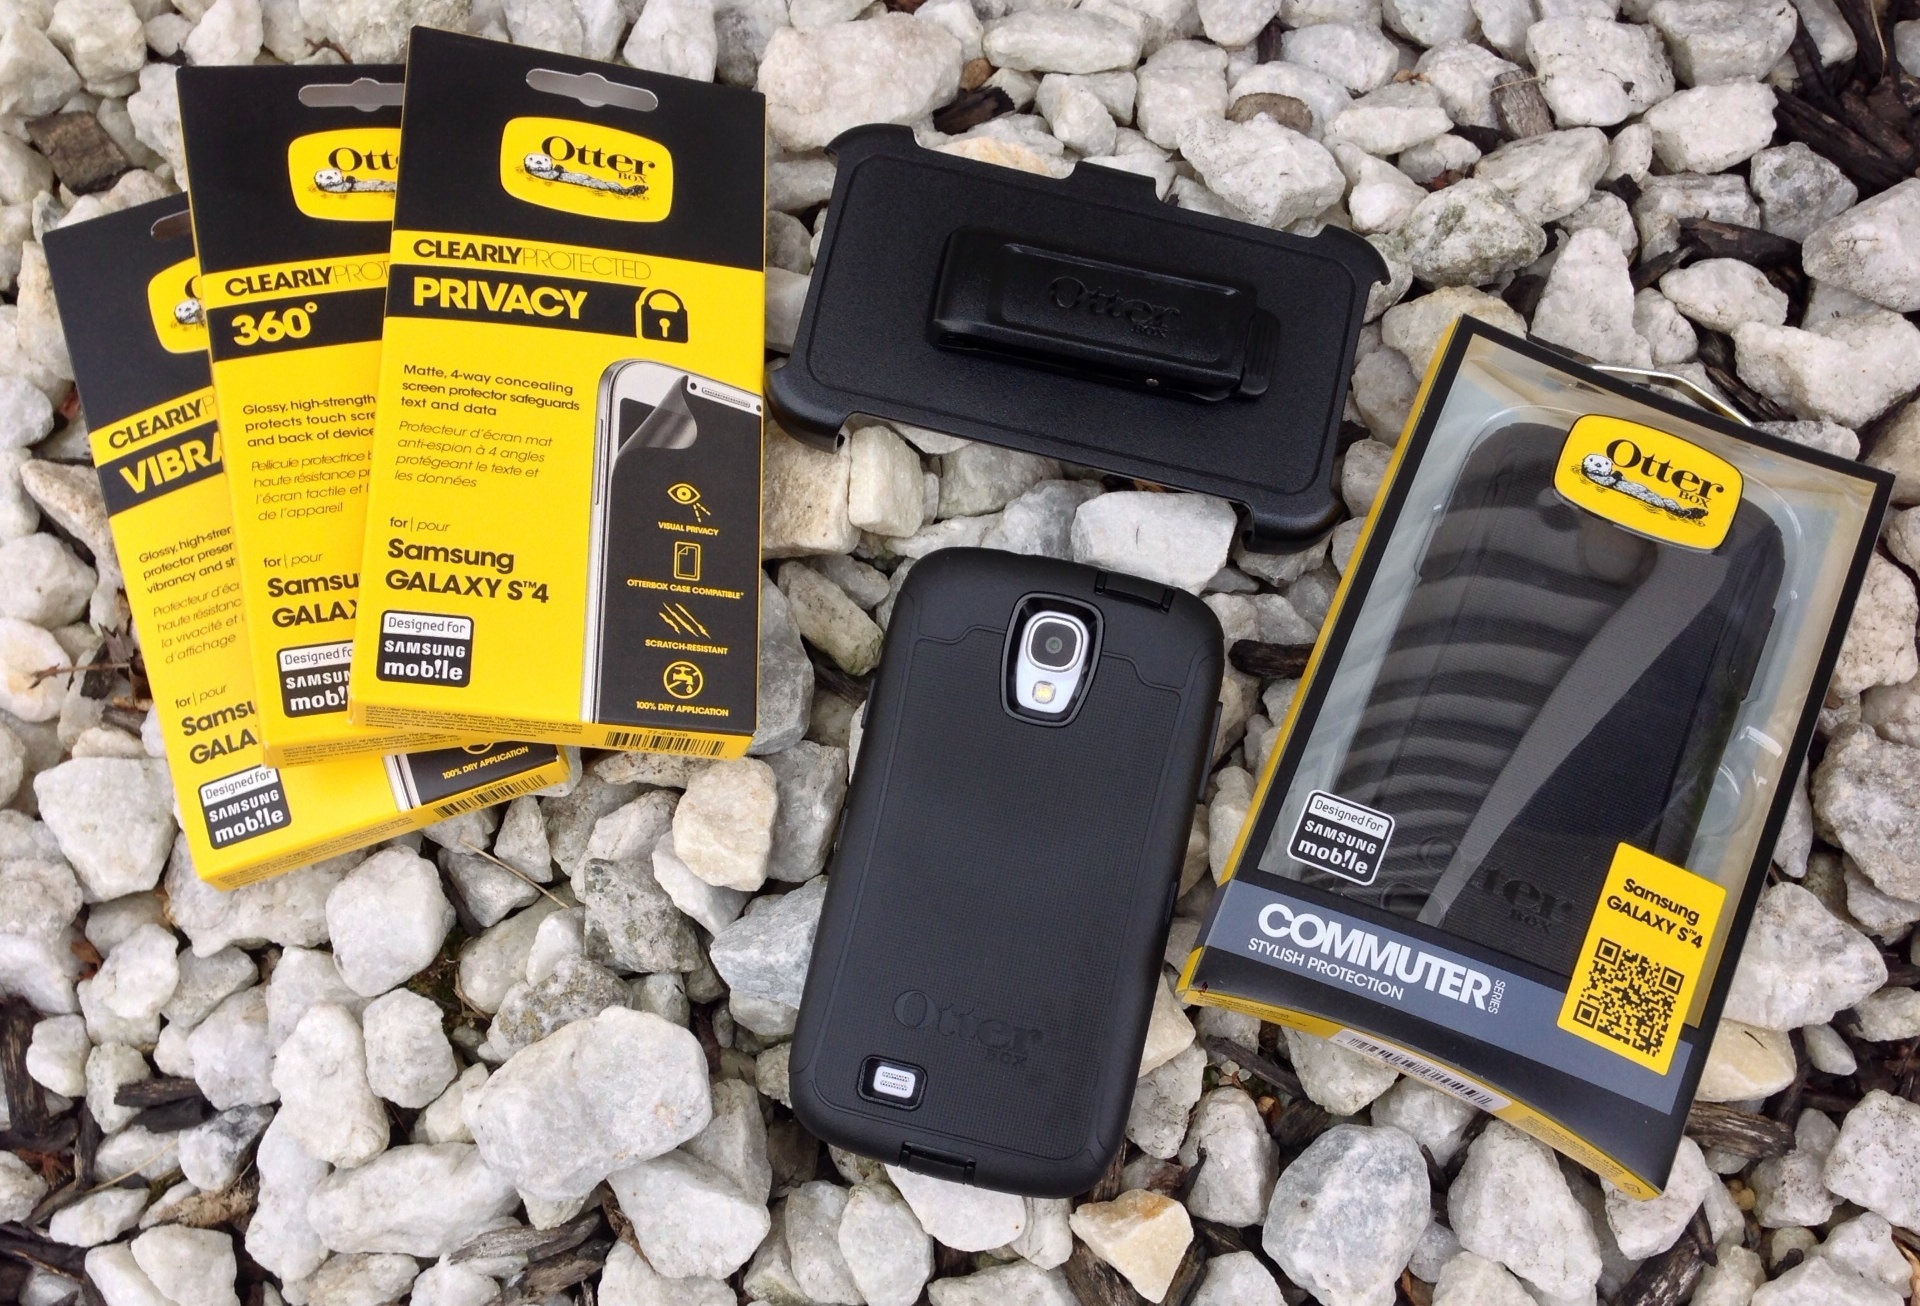 Win an AT&T Samsung Galaxy S4 and OtterBox cases from OtterBox and Gotta Be Mobile.